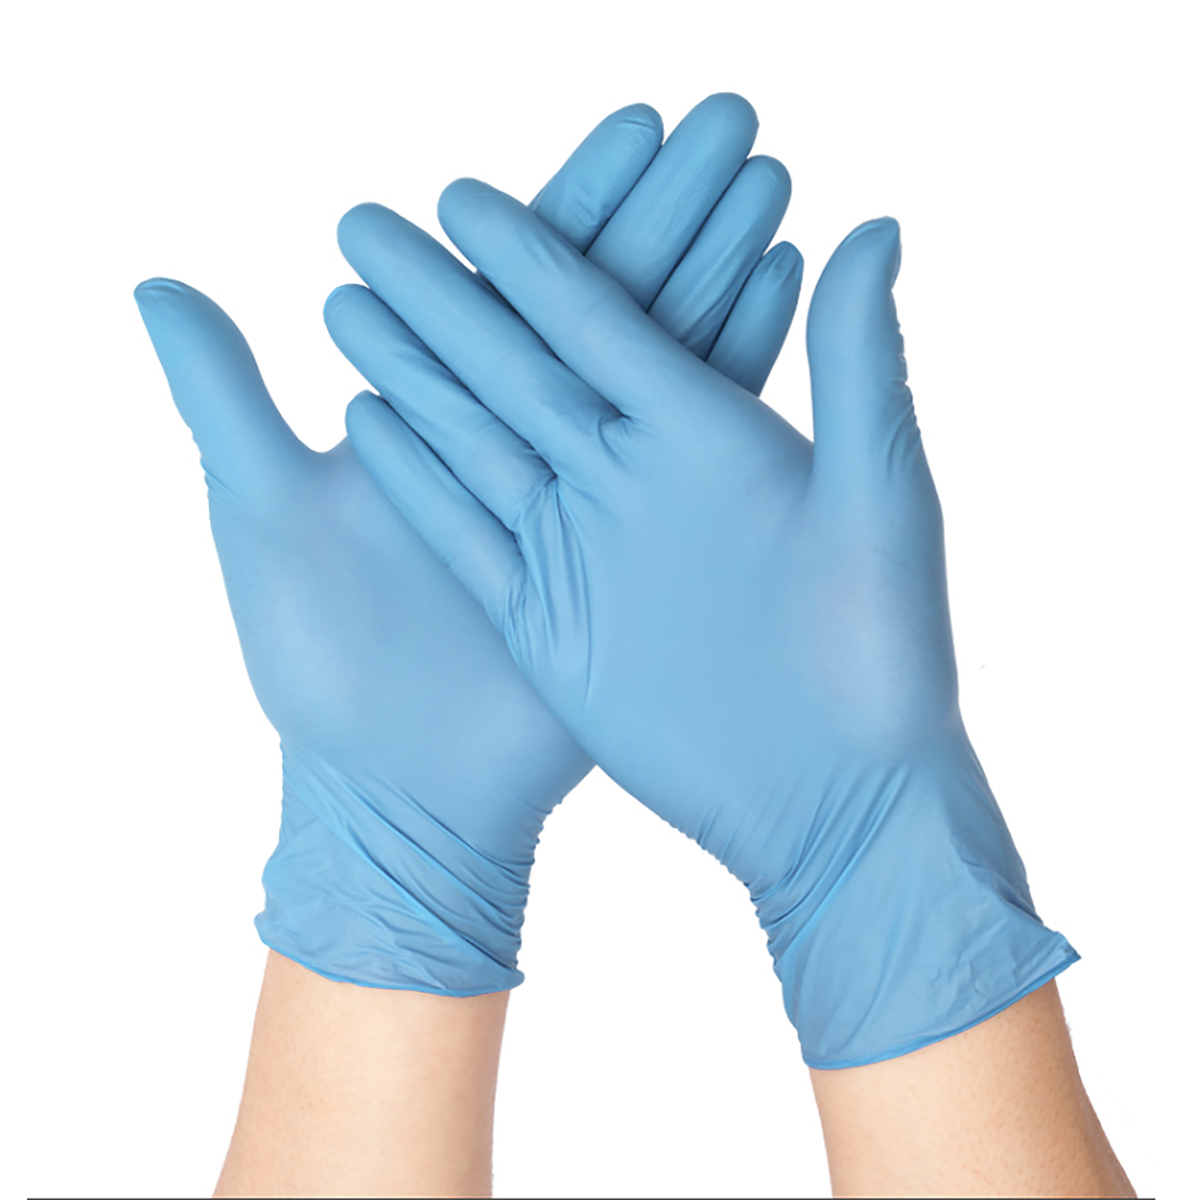 Find 100PCS Disposable Gloves Nitrile Cleaning Food Gloves Universal Household Garden Kitchen Cleaning Hand Protective Gloves for Sale on Gipsybee.com with cryptocurrencies